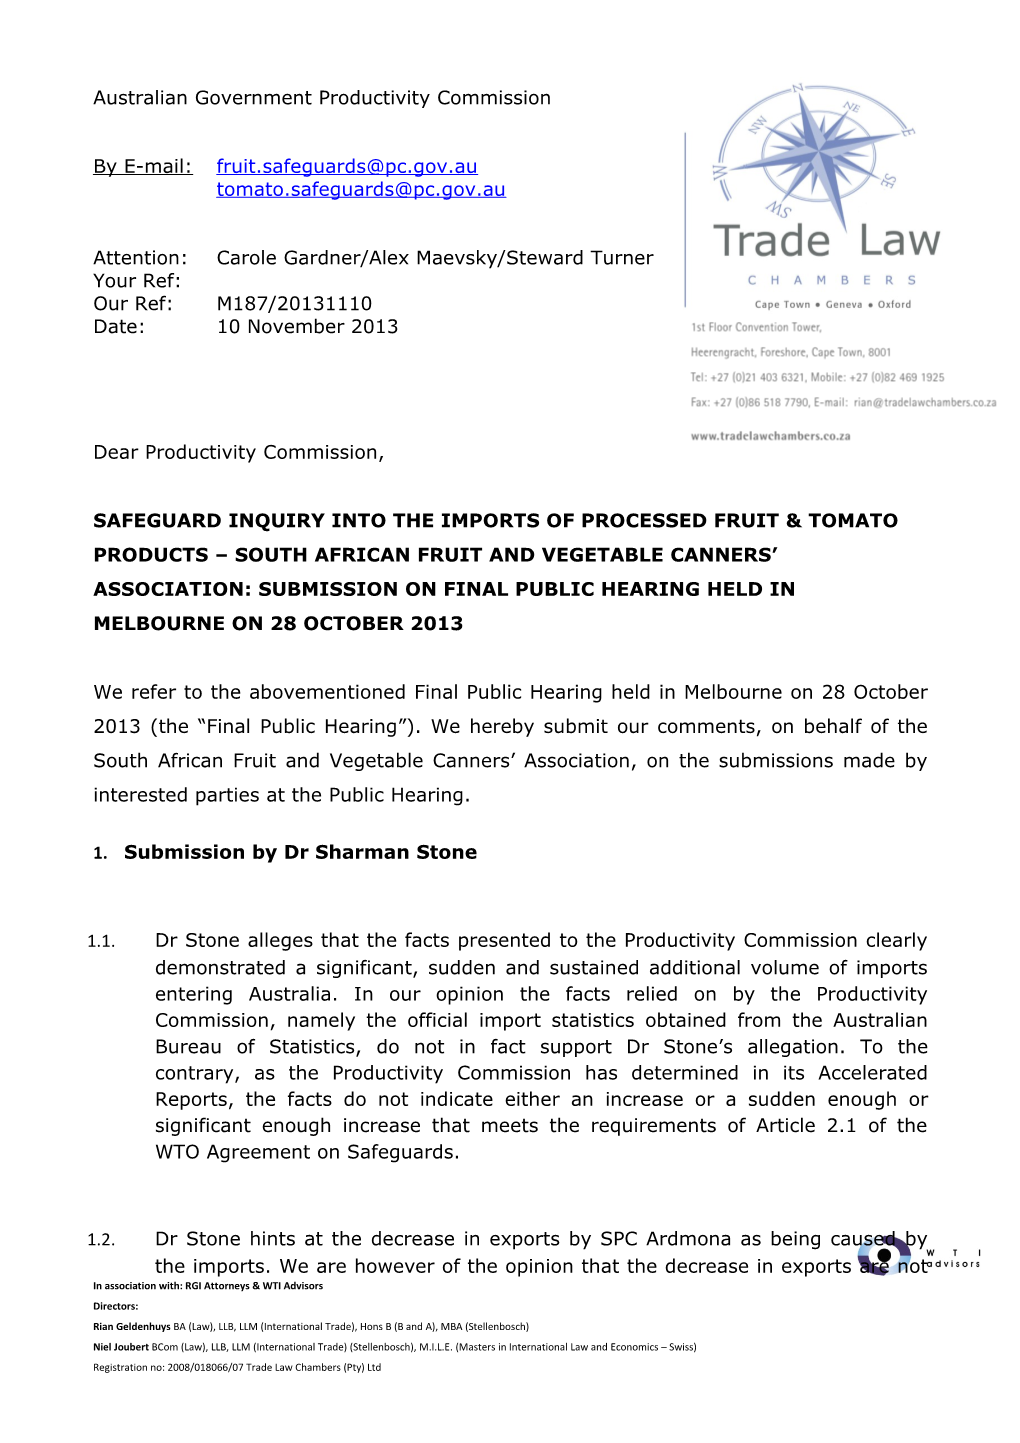 Submission AR44 - South African Fruit and Vegetable Canners' Association - Import of Processed